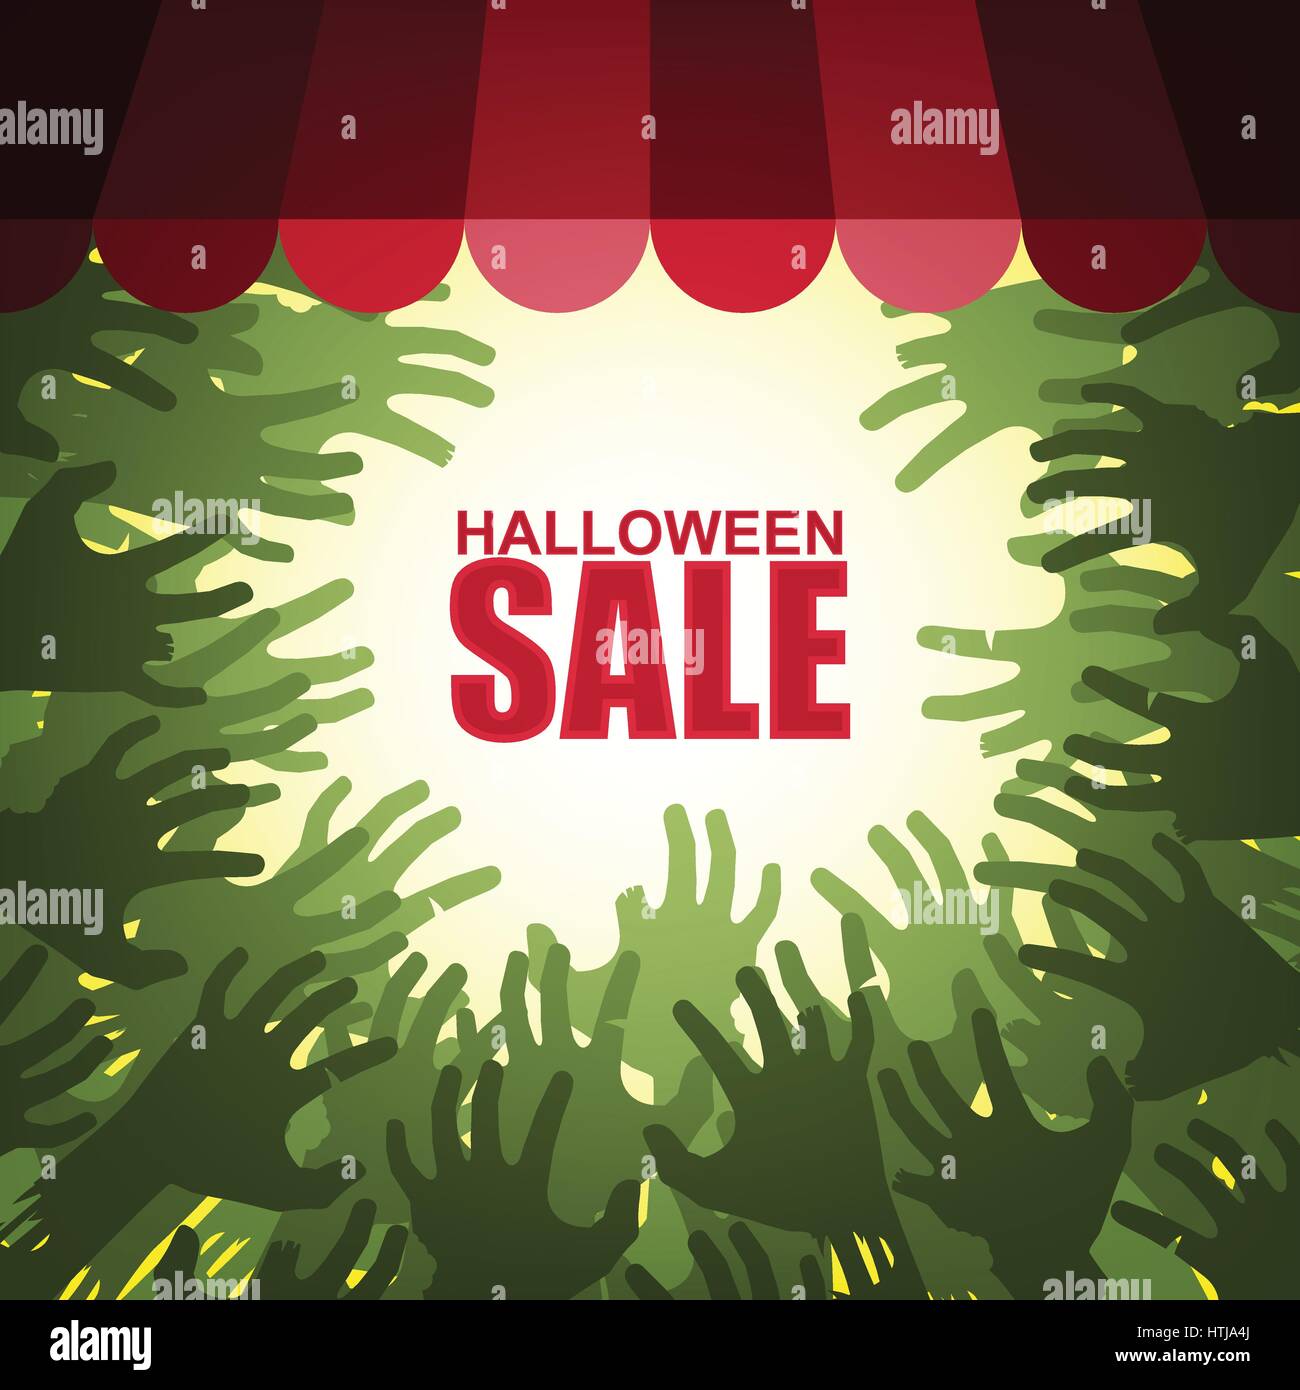 Halloween sale with group of zombies' hands attacking shop window Stock Vector